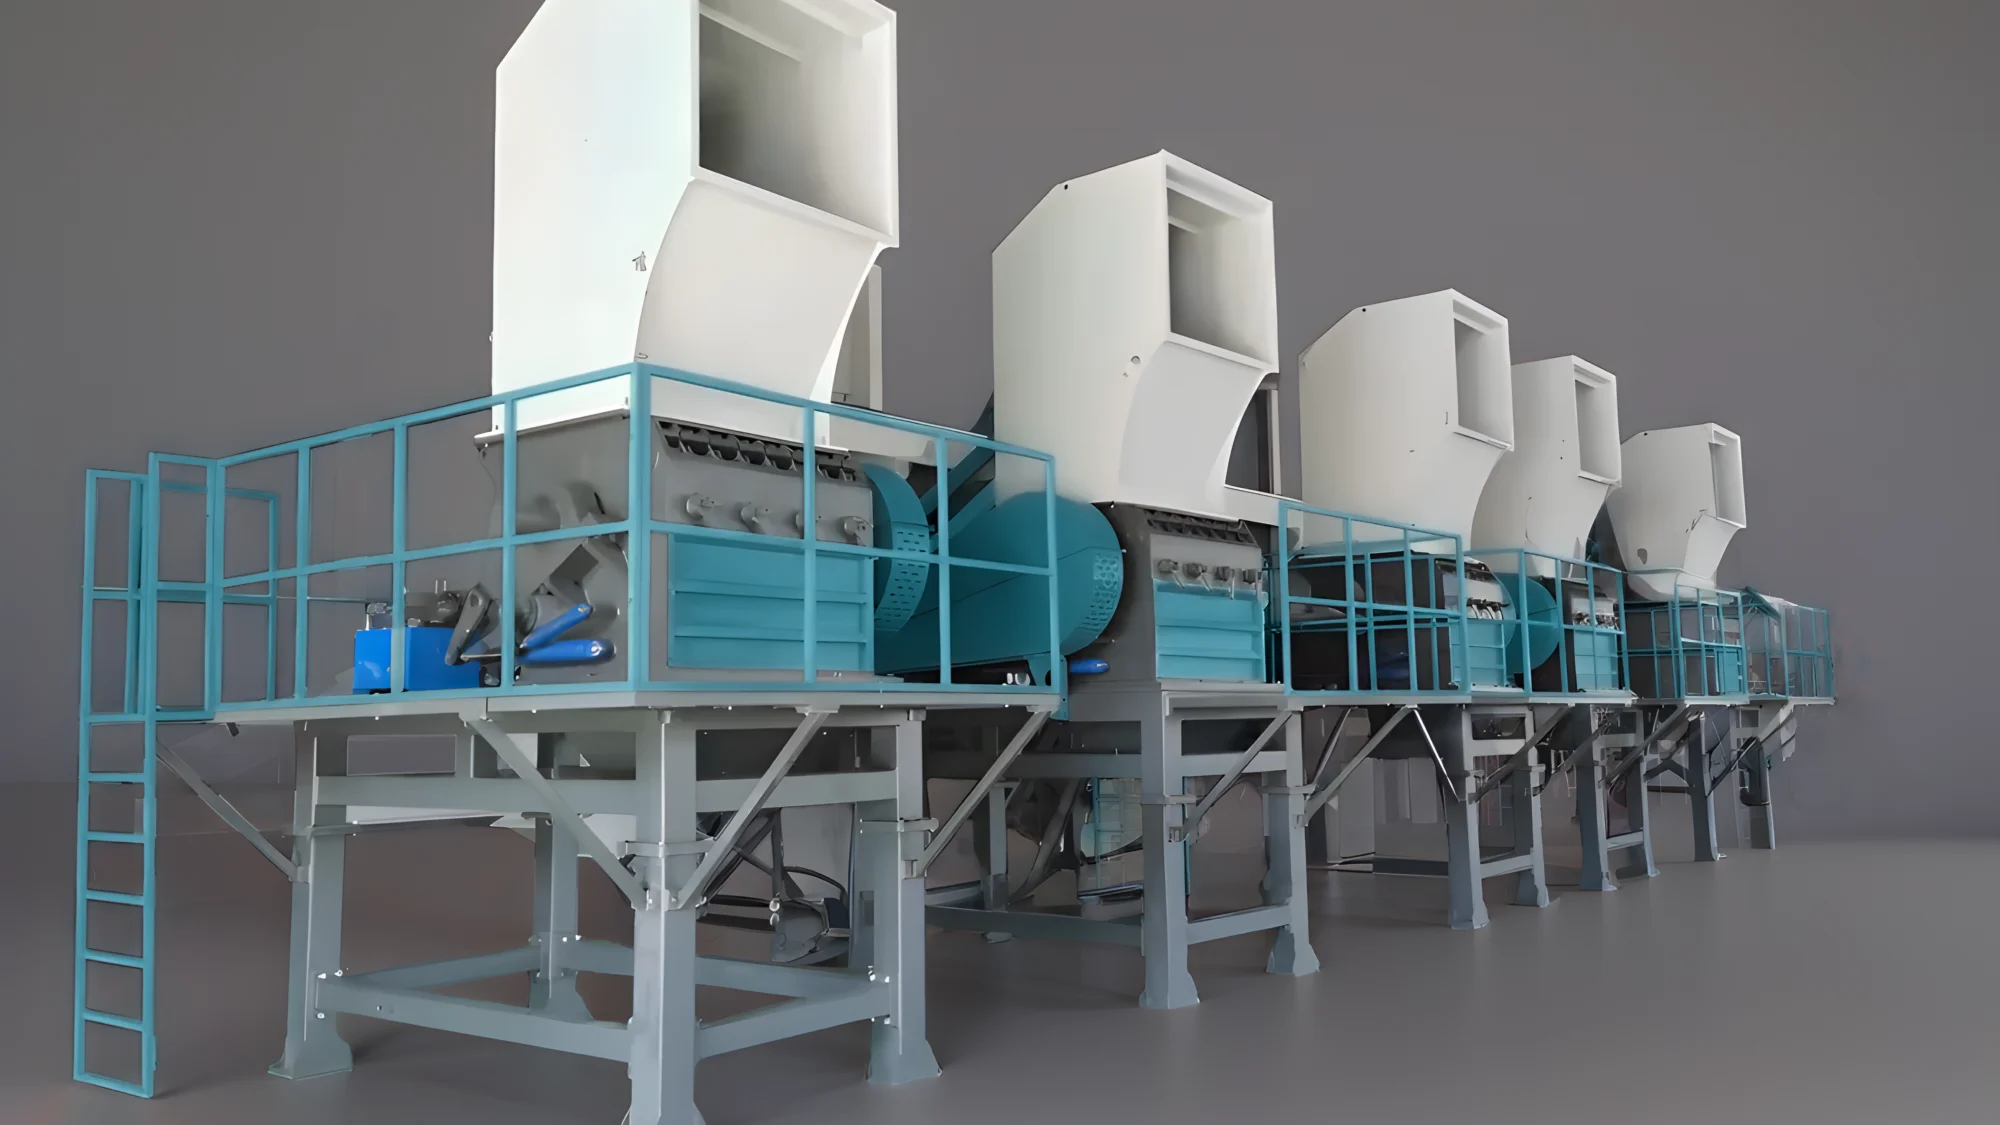 The image shows machinery that is consistent with a plastic crushing or recycling system. In a typical setup, plastic crushers are used to reduce plastic waste into smaller, more manageable pieces or granules. These machines can be part of a larger recycling line that includes several stages, such as sorting, washing, crushing, drying, and pelletizing. The machines in the image have a modular design, with each unit equipped with its own feeding hopper and crushing mechanism. The blue structures likely provide support and possibly contain conveyance systems to move crushed materials to the next stage of processing. The design suggests a heavy-duty operation, capable of handling large volumes of material. These systems are crucial in recycling operations to manage and repurpose plastic waste, thereby contributing to sustainability and environmental conservation efforts.